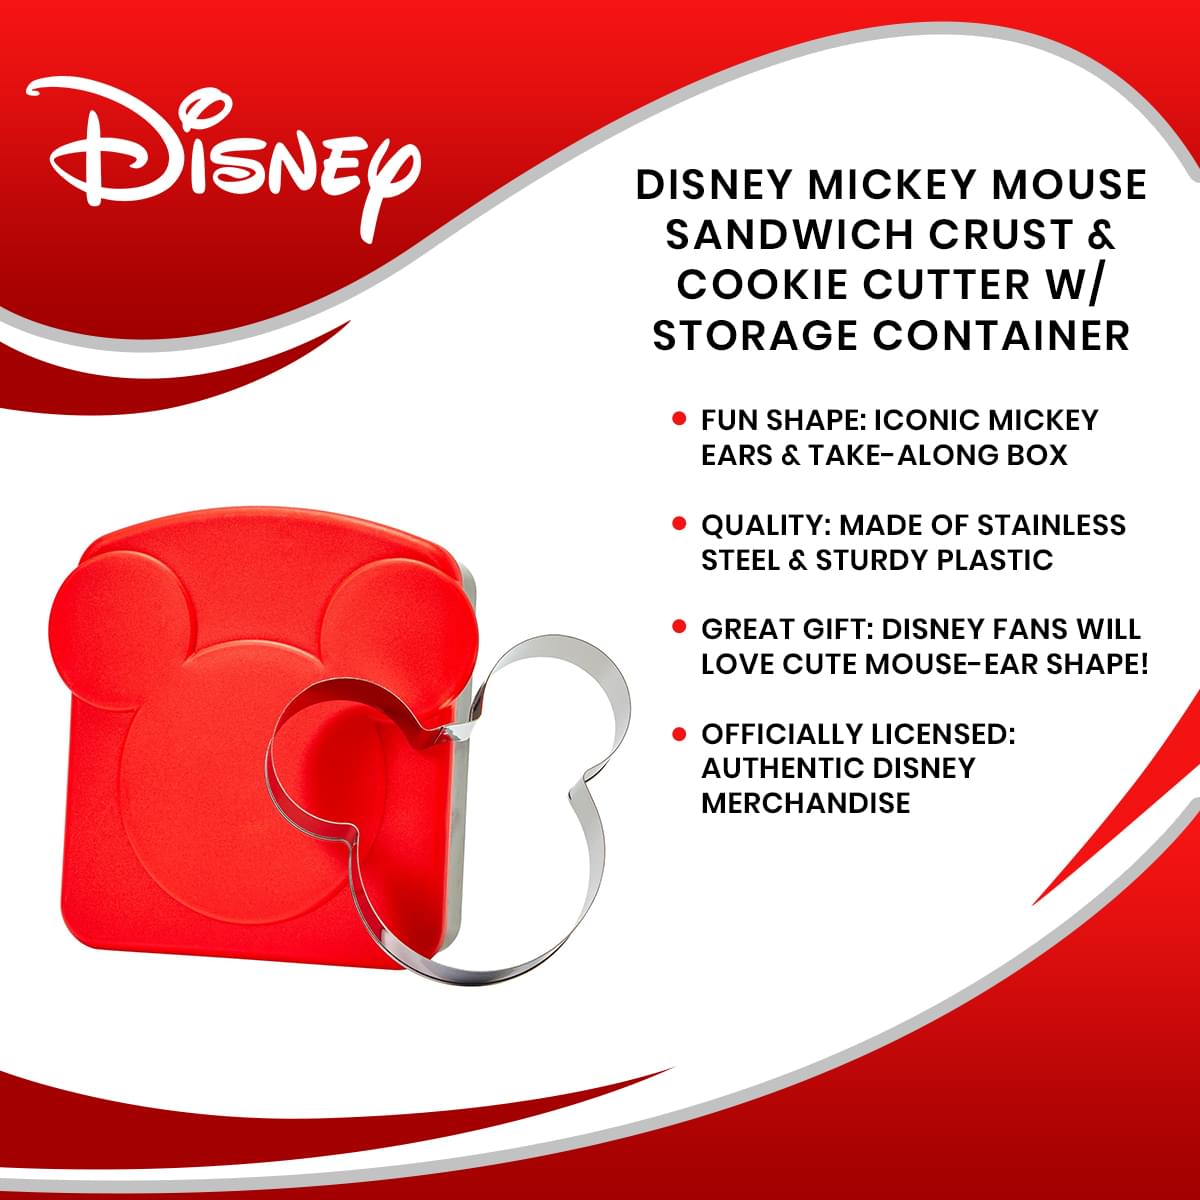 Disney Mickey Mouse Sandwich Crust & Cookie Cutter W/ Storage Container